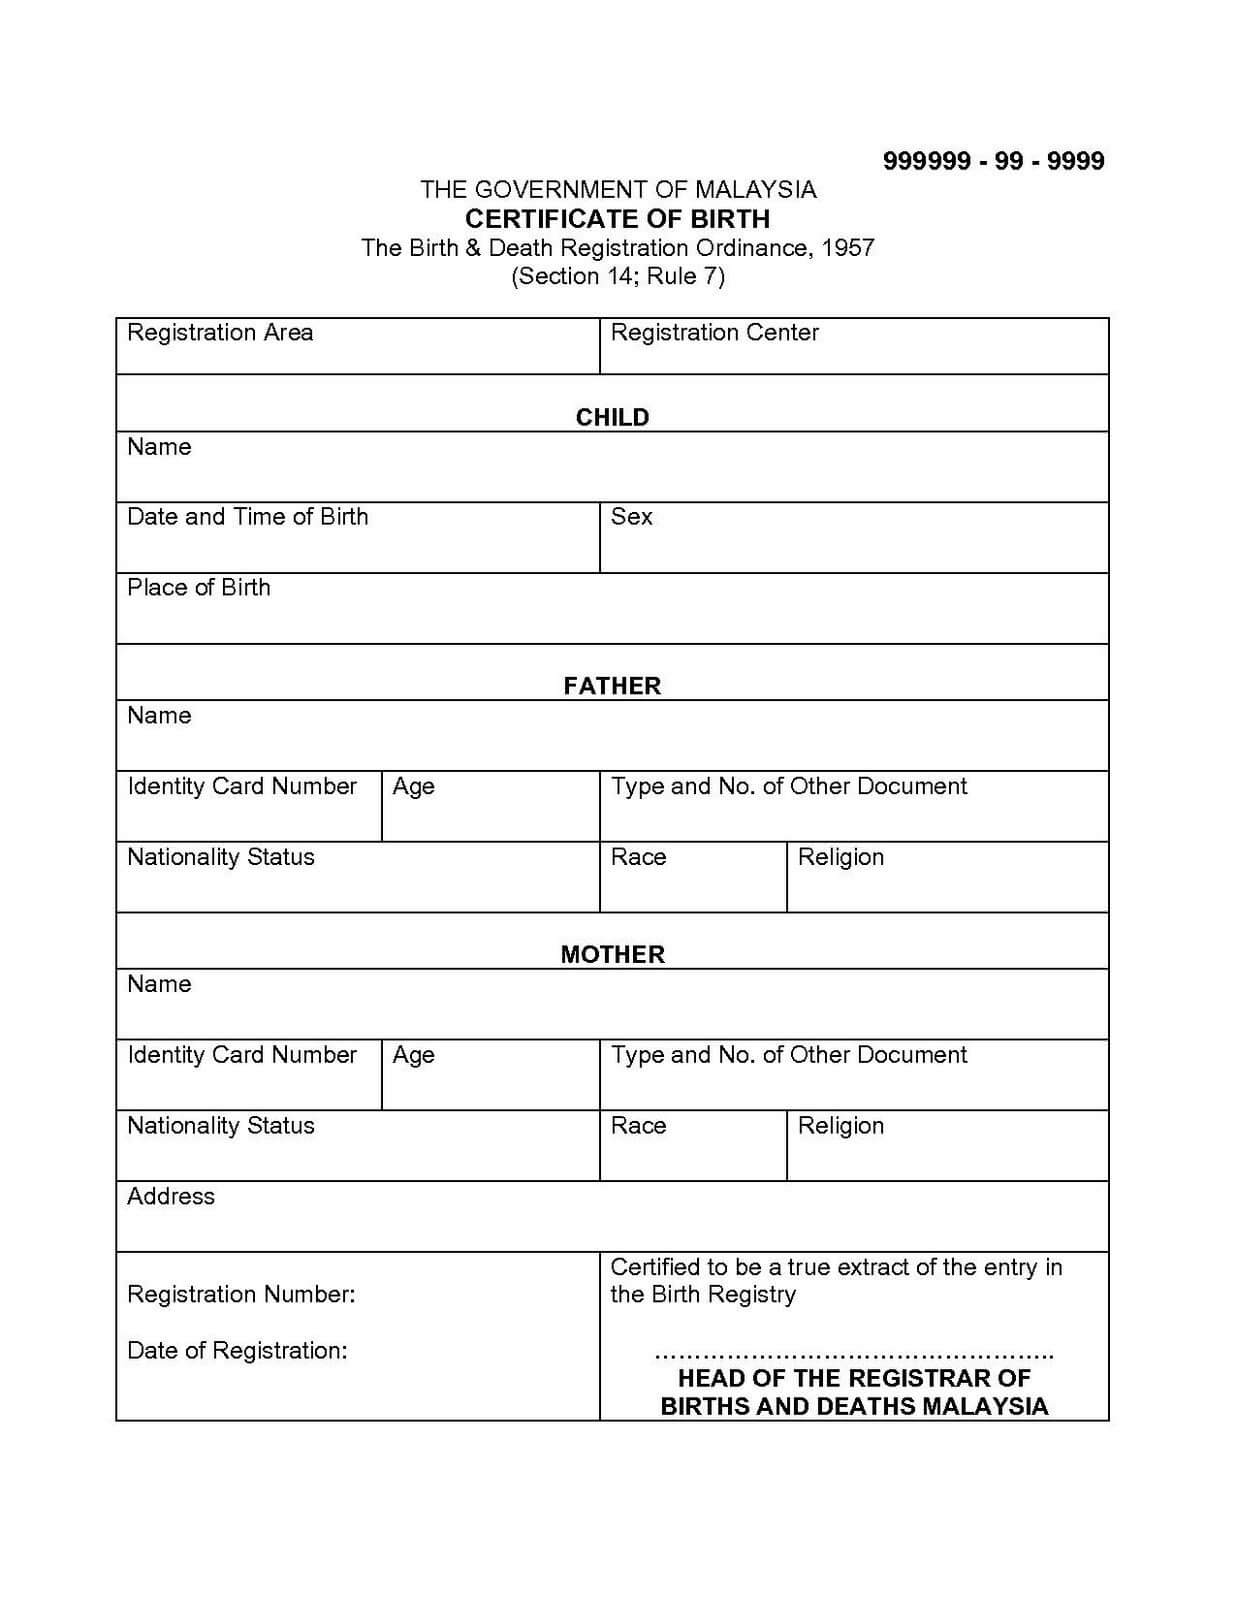 Death Certificate Template In Spanish Unique Birth Translate Pertaining To Death Certificate Translation Template